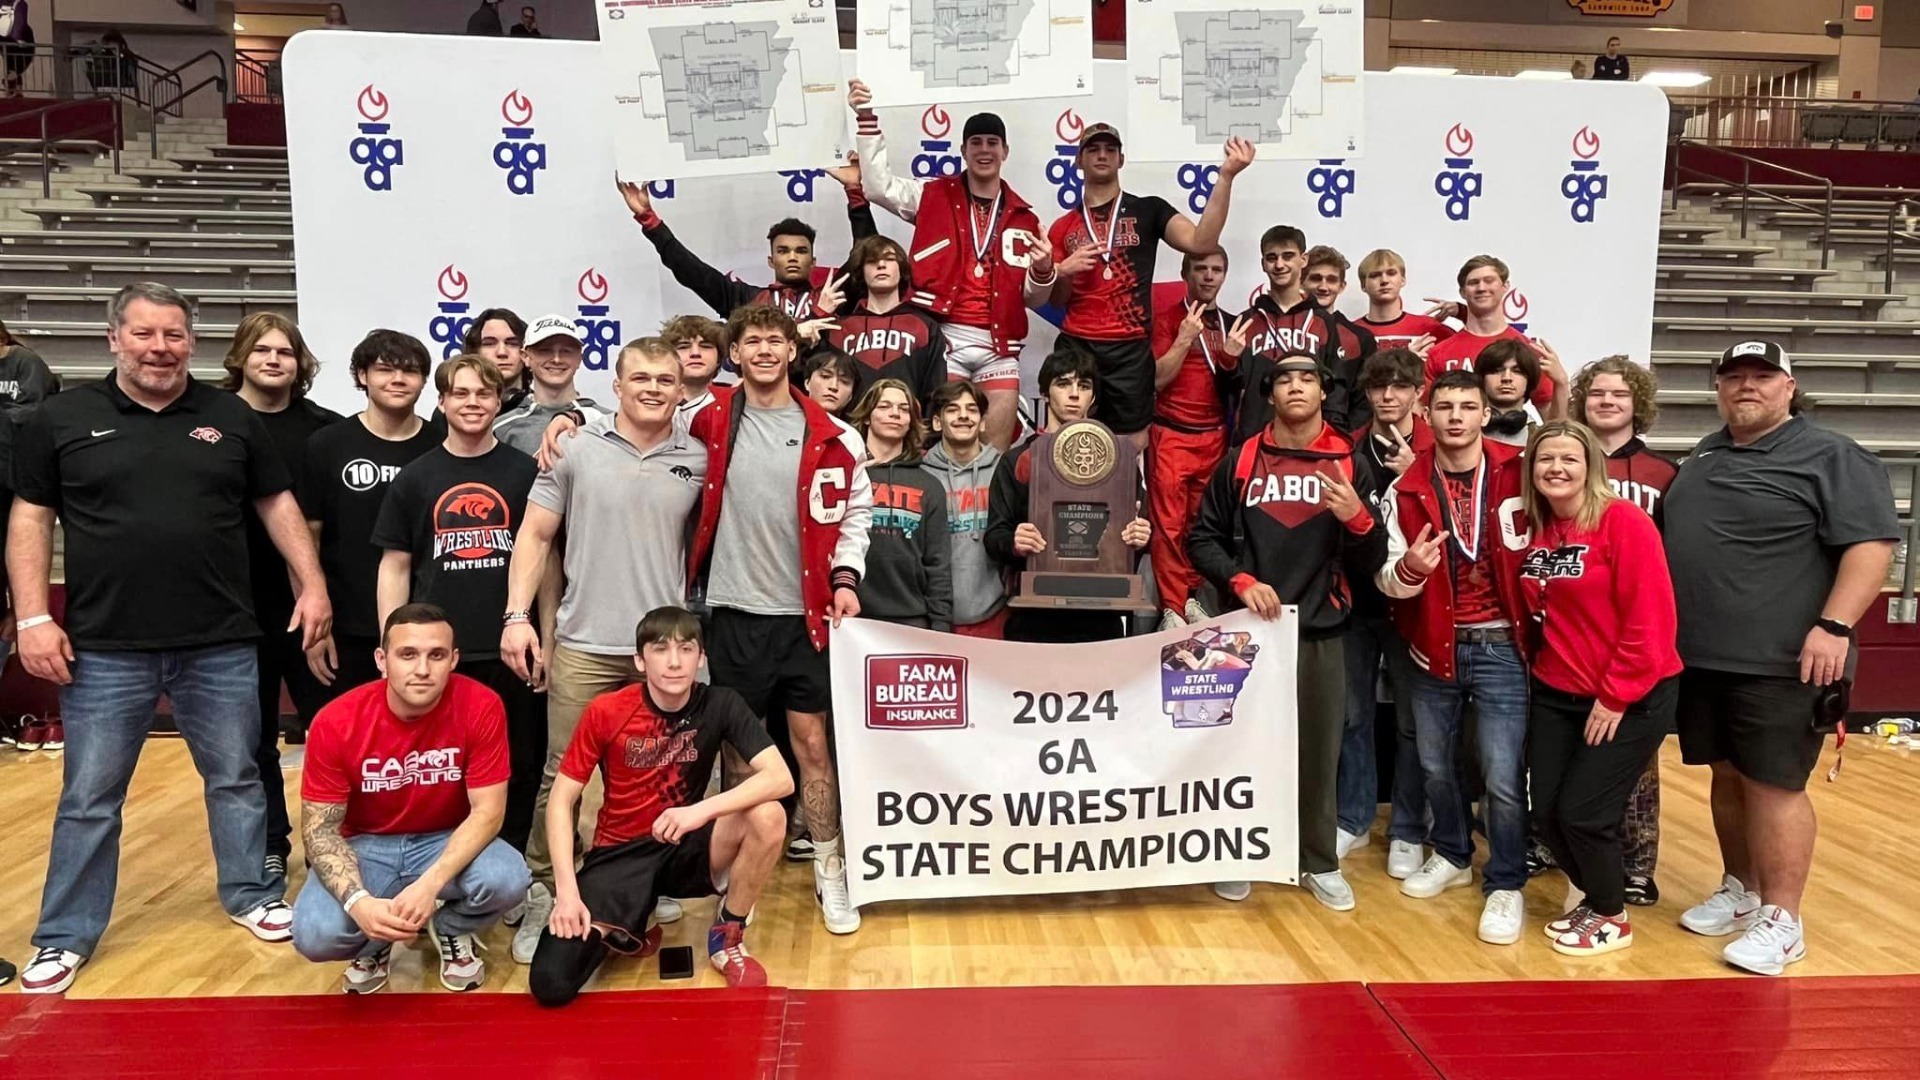 CabotSlide 4 - 2024 6A Boys Wrestling State Champions